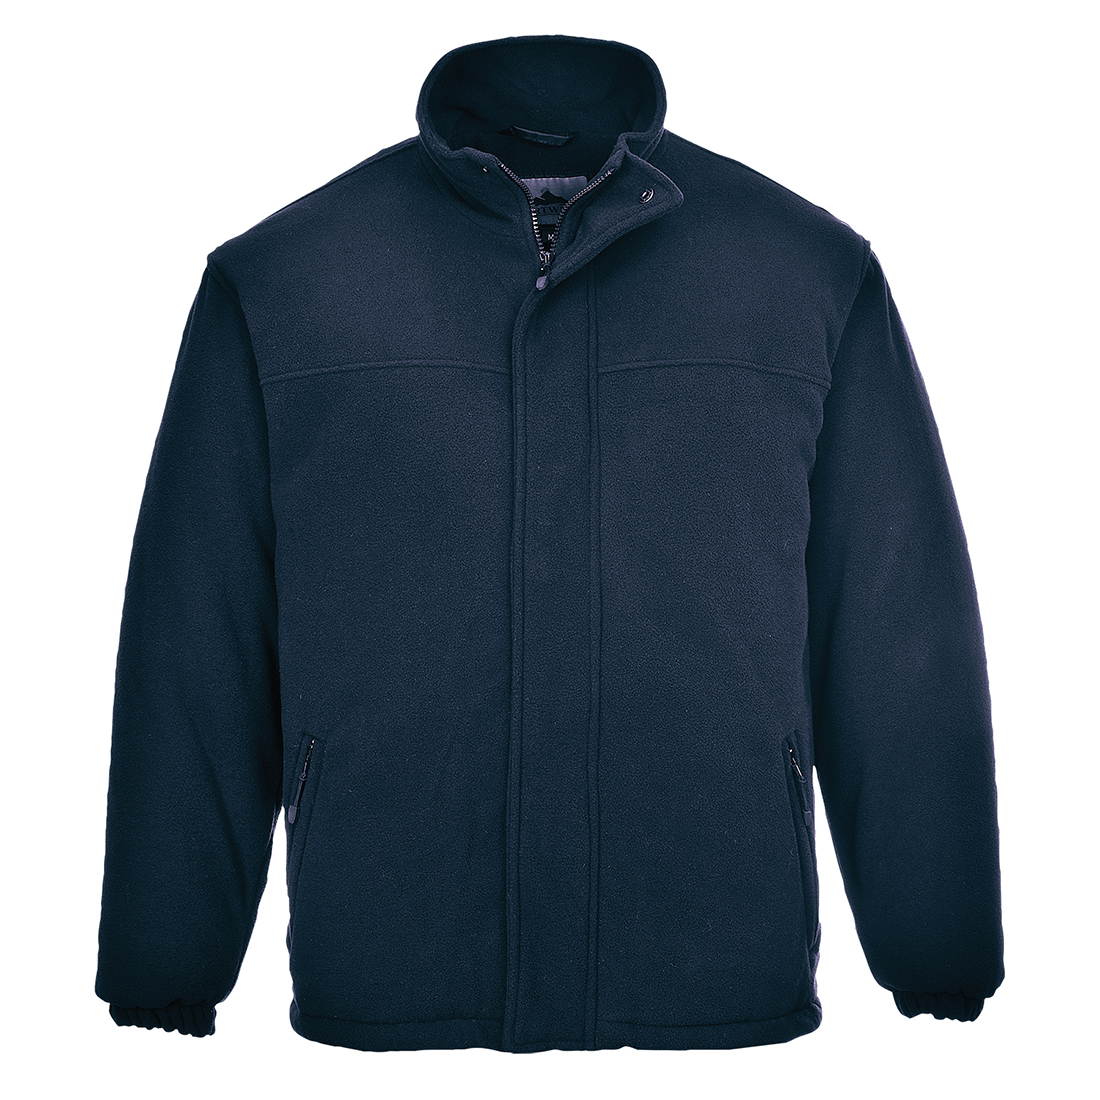 Portwest YUKON QUILTED FLEECE - F500 - A to Z Safety Centre | PPE ...